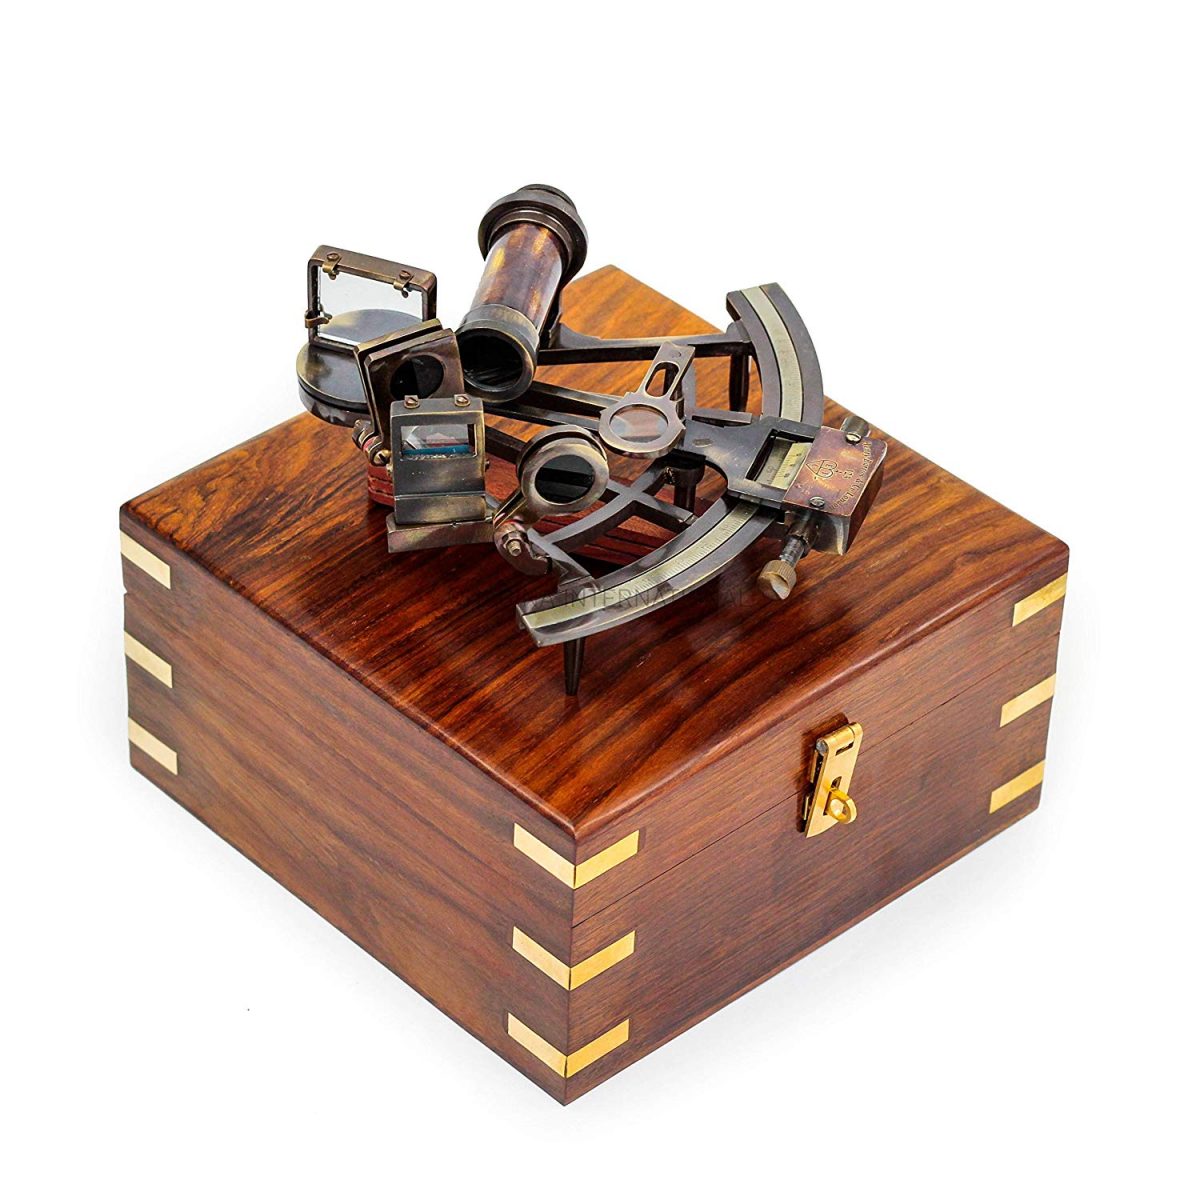 Nagina International Nautical Pirate's Maritime Astronomical Brass Sextant with Decorative Anchor Inlaid Rosewood Storage Wooden Box | Exclusive Decor Gifts (Antique Brass)